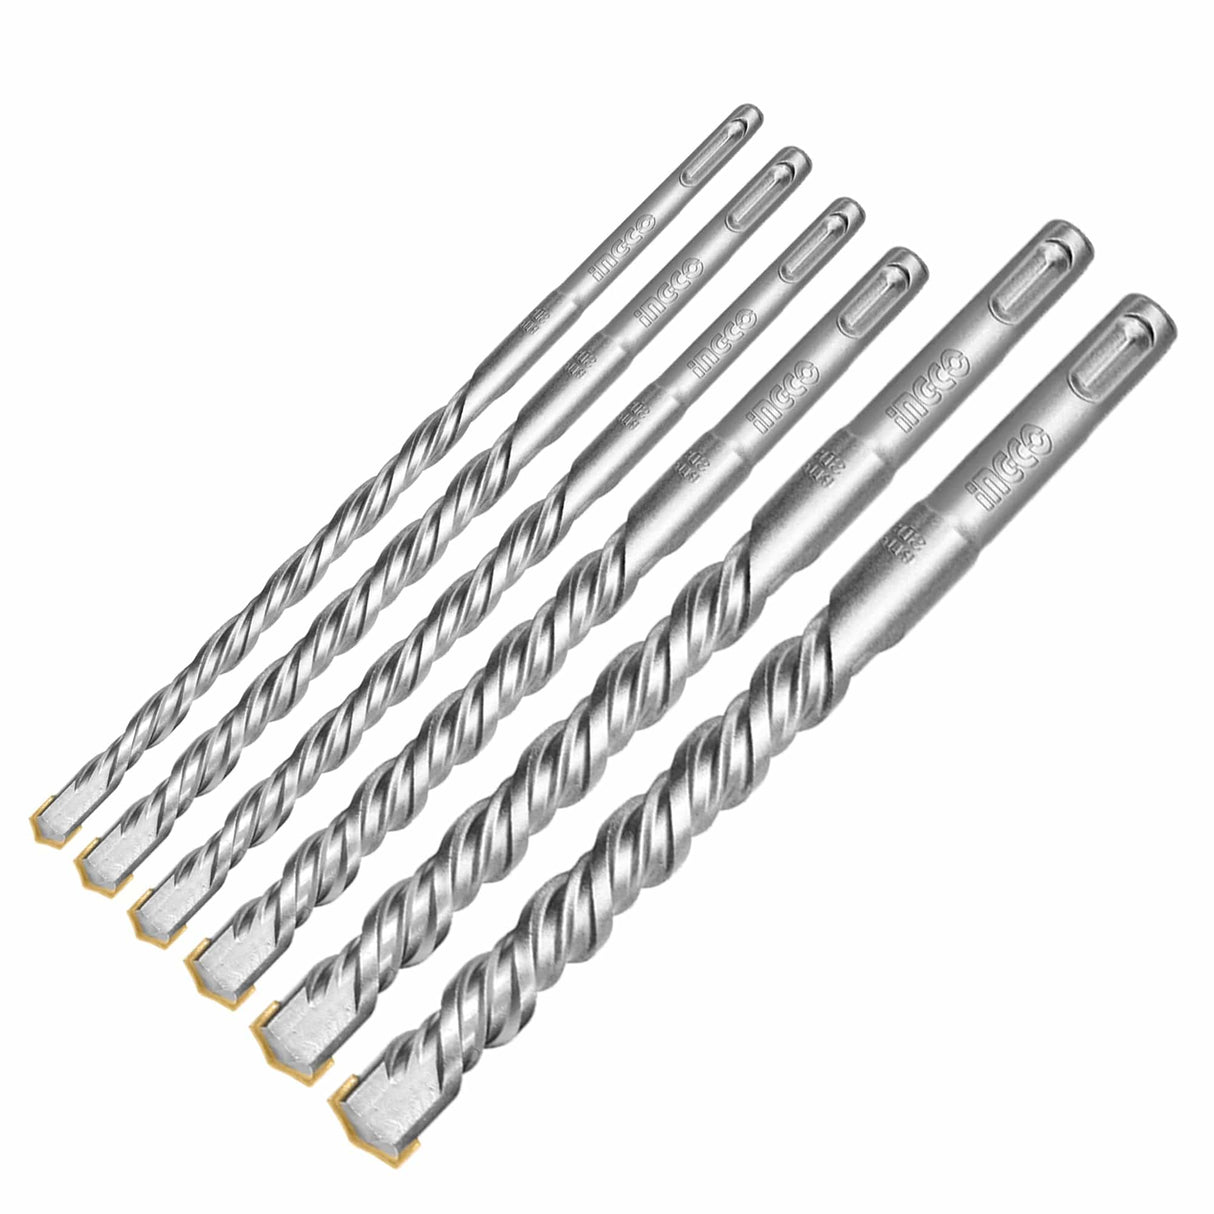 Ingco SDS Plus Hammer Drill Bit | Buy Online in Accra, Ghana - Supply Master Drill Bits Buy Tools hardware Building materials